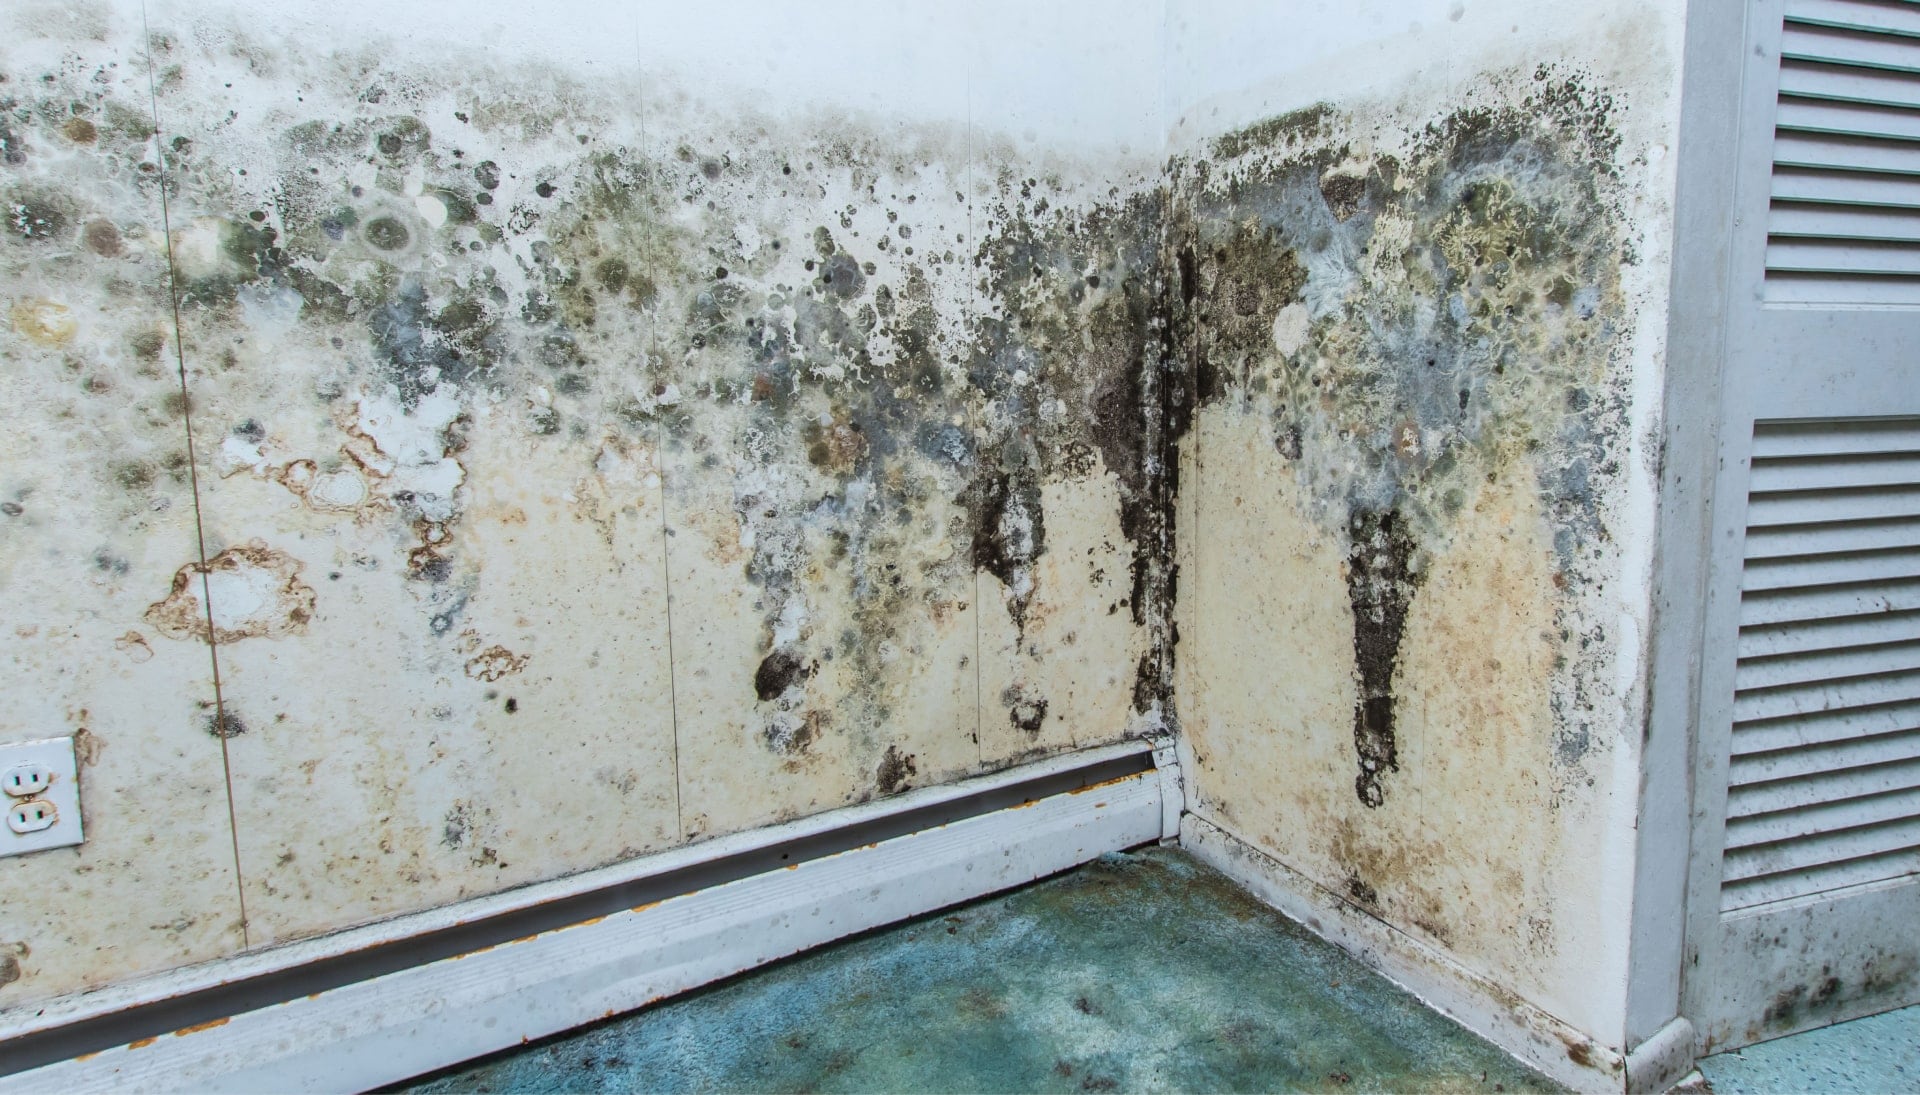 A mold remediation team using specialized techniques to remove mold damage and control odors in a Miami property, with a focus on safety and efficiency